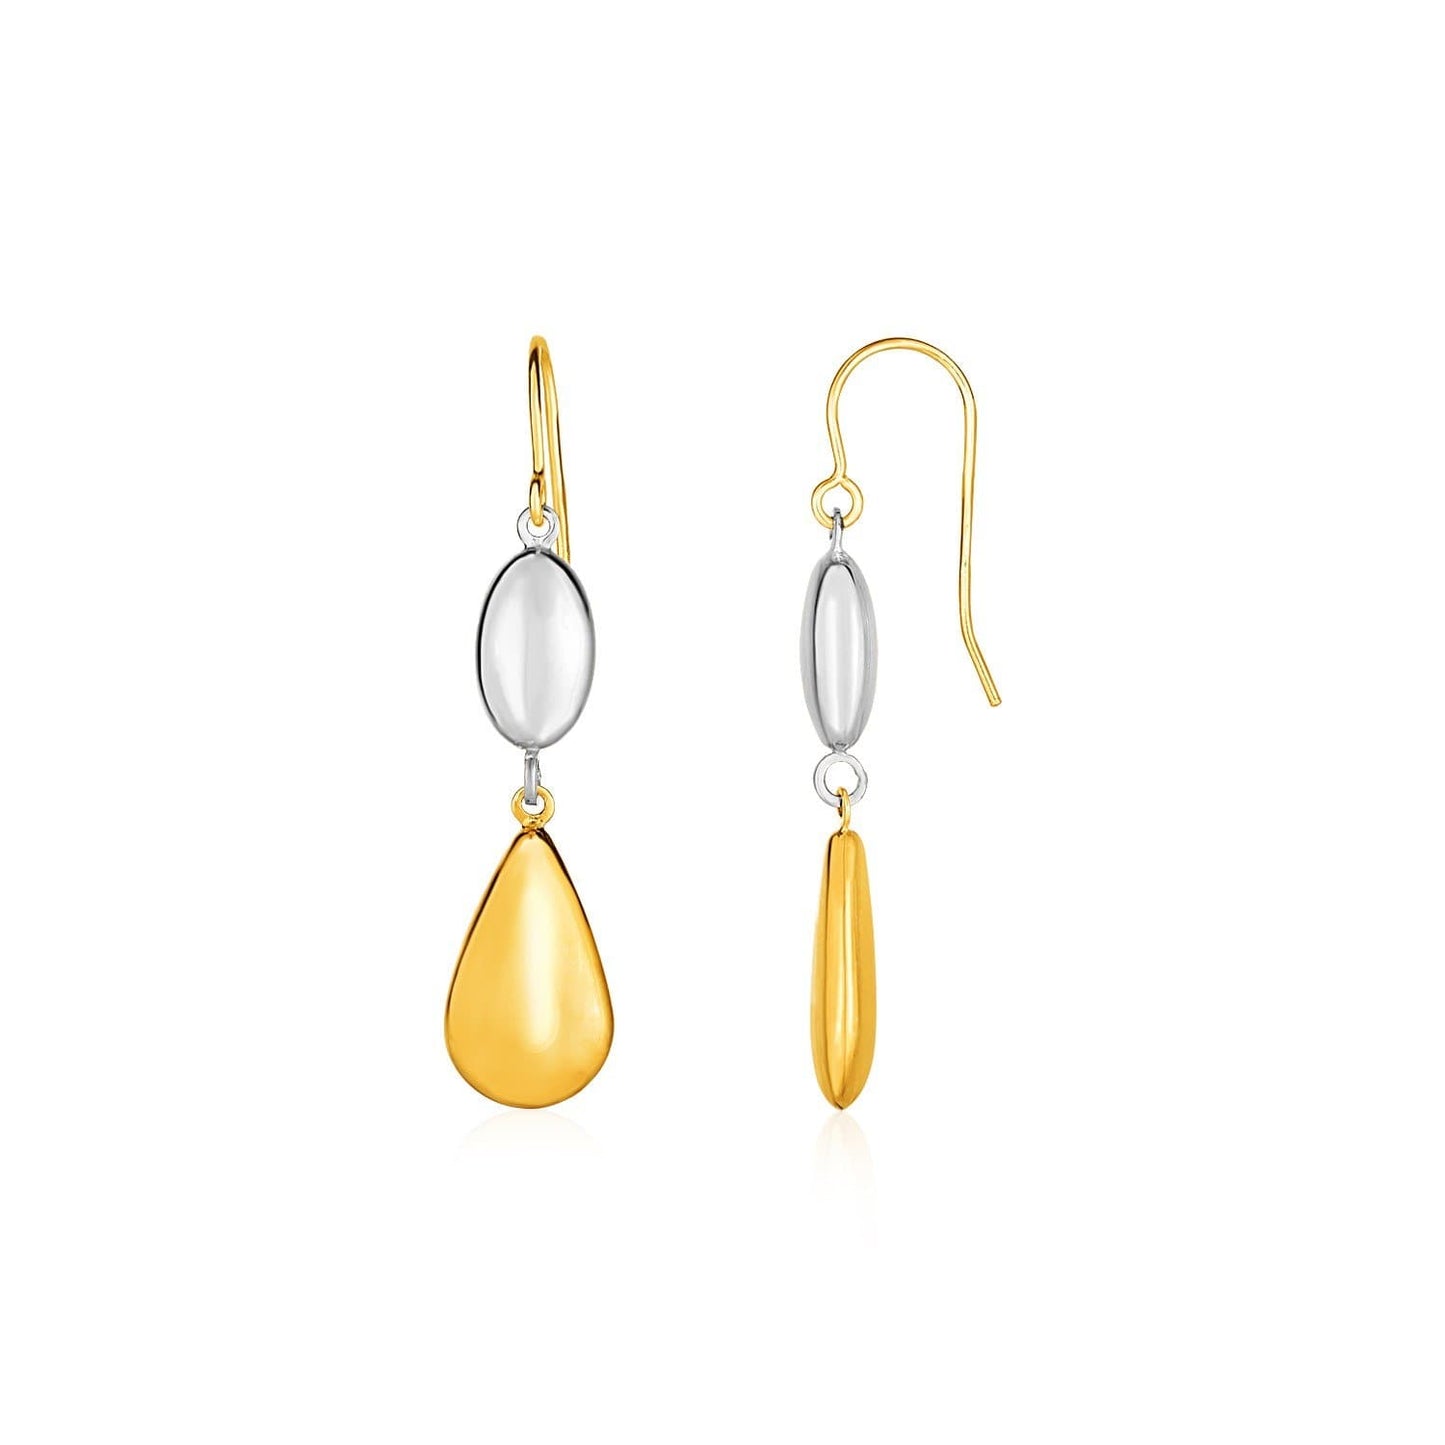 Two-Tone Puffed Oval and Teardrop Drop Earrings in 10k Yellow and White Gold